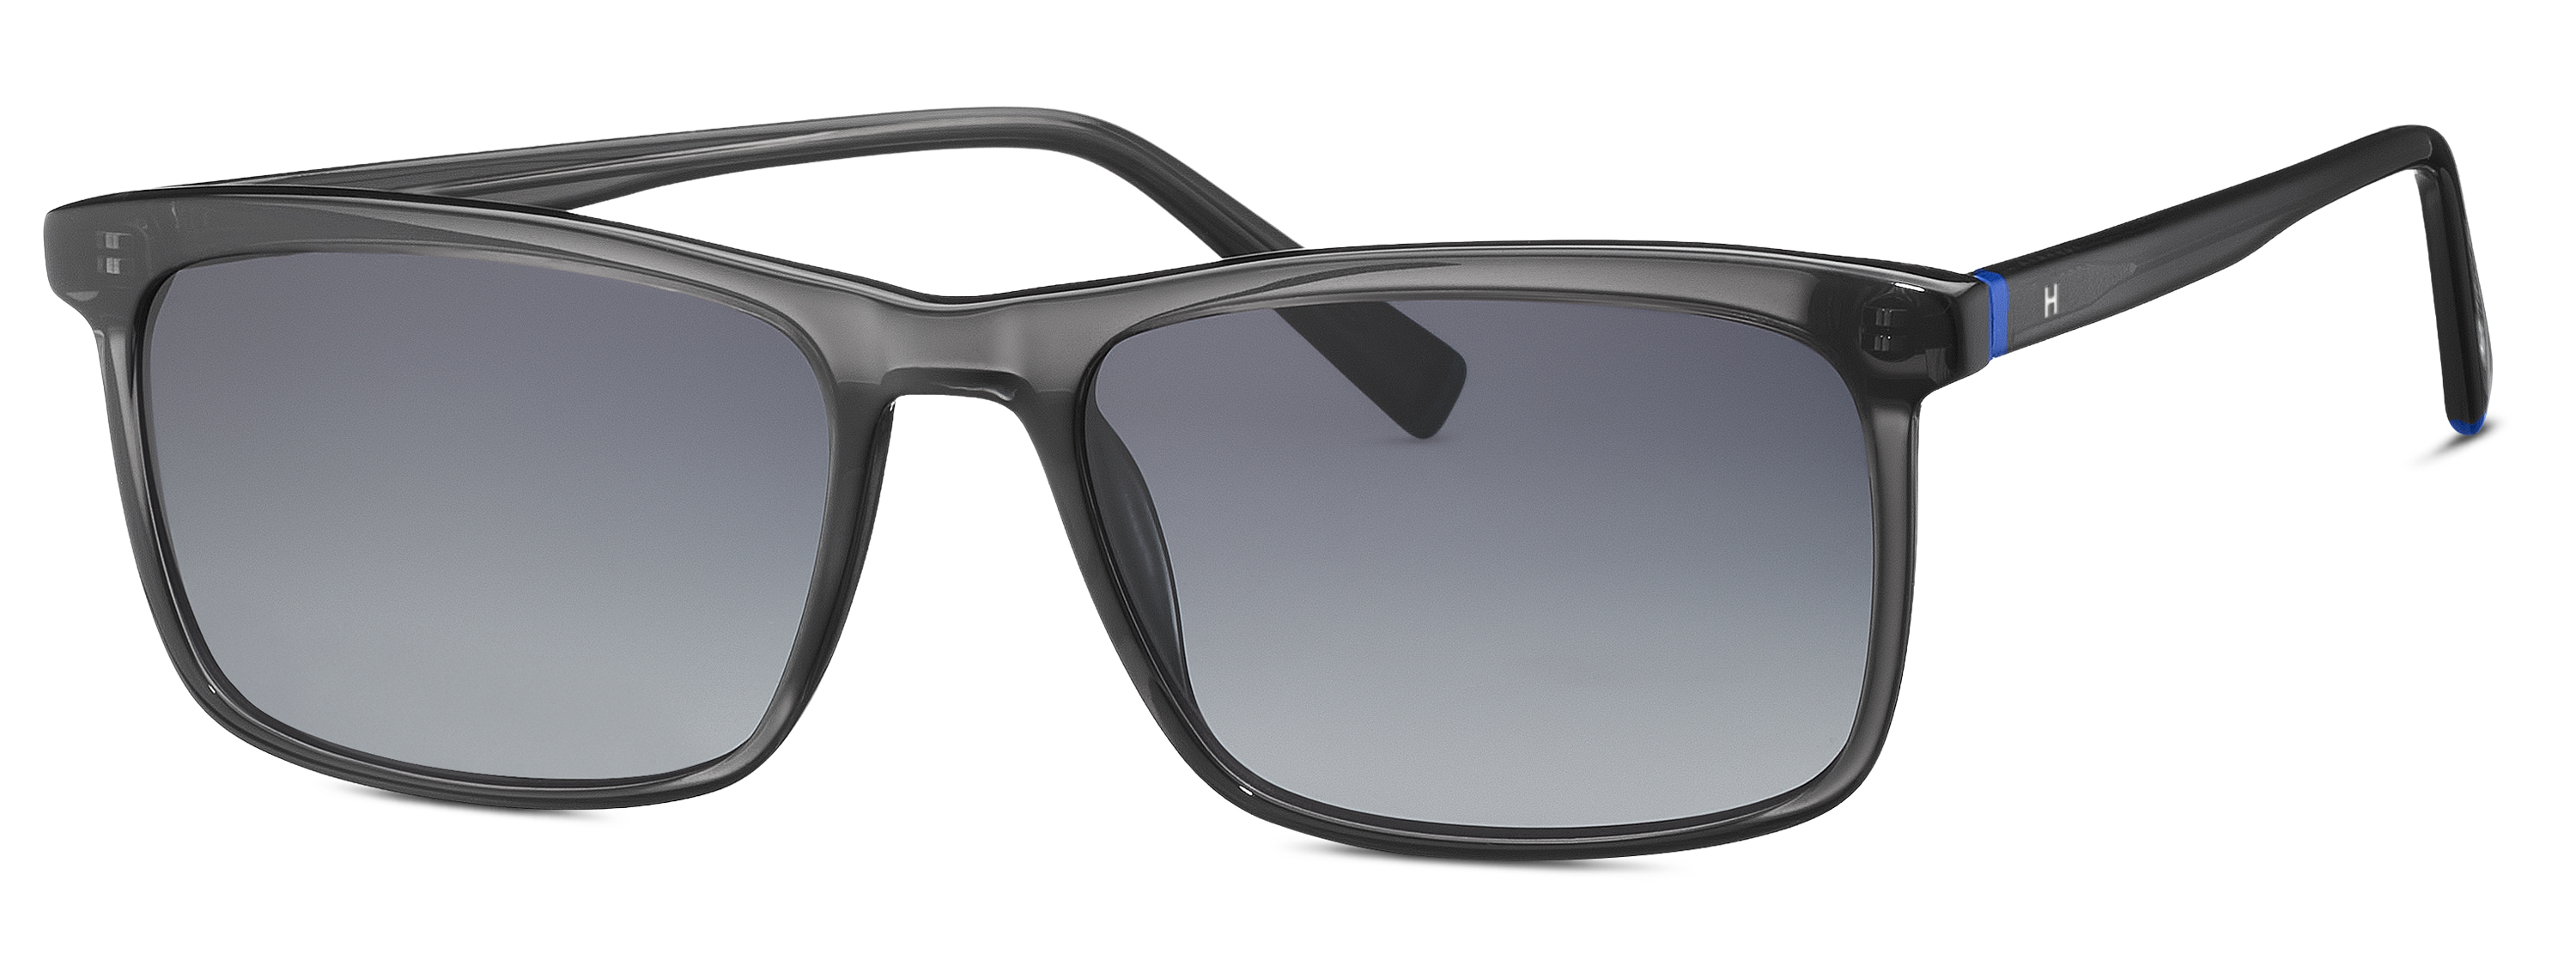 [products.image.front] HUMPHREY´S eyewear 588170 30 Sonnenbrille